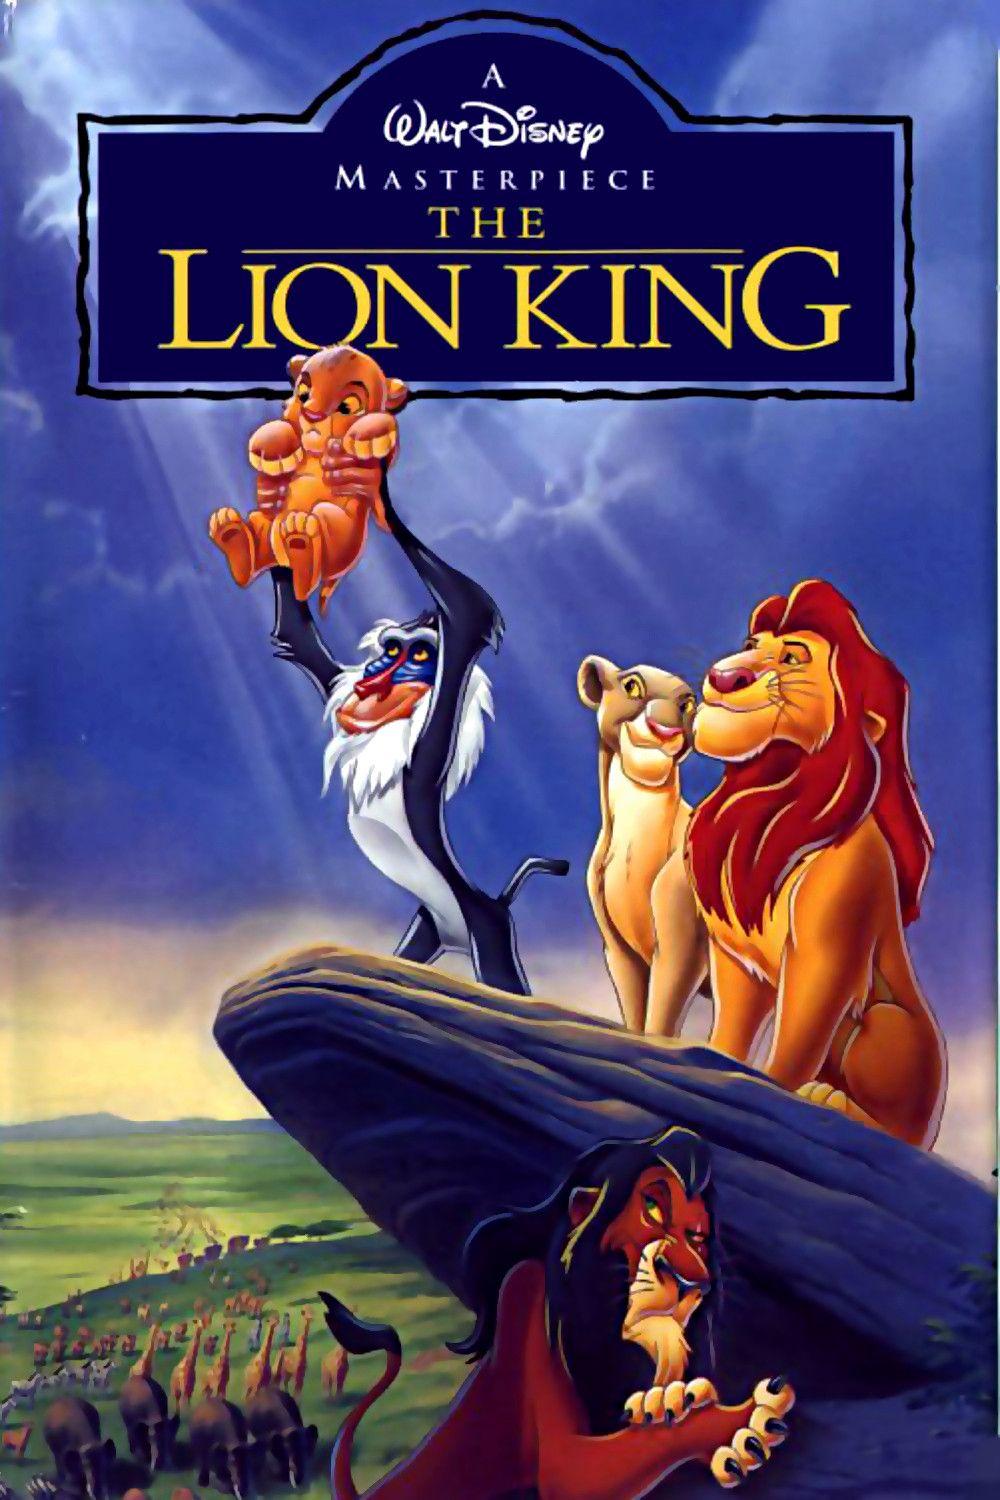 Disney's Lion King Movie Logo - outdoor movie night: The Lion King - mpls downtown council